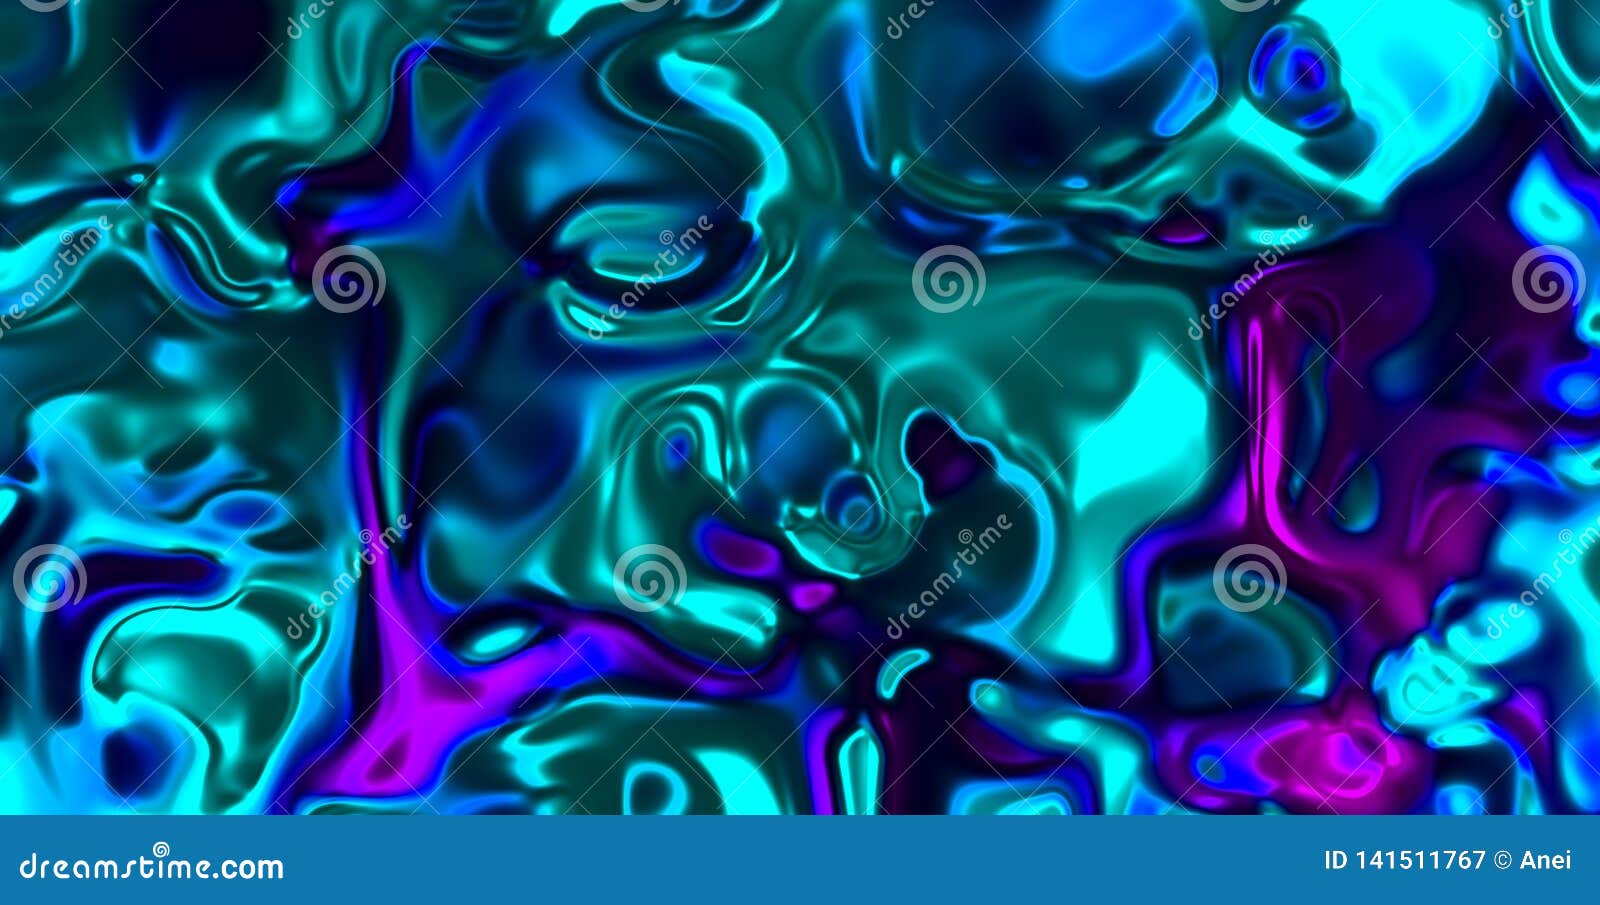 Liquid Glass Looking Abstract Colorful Background In Vivid Colors Stock Image Image Of Ocean Chaotic